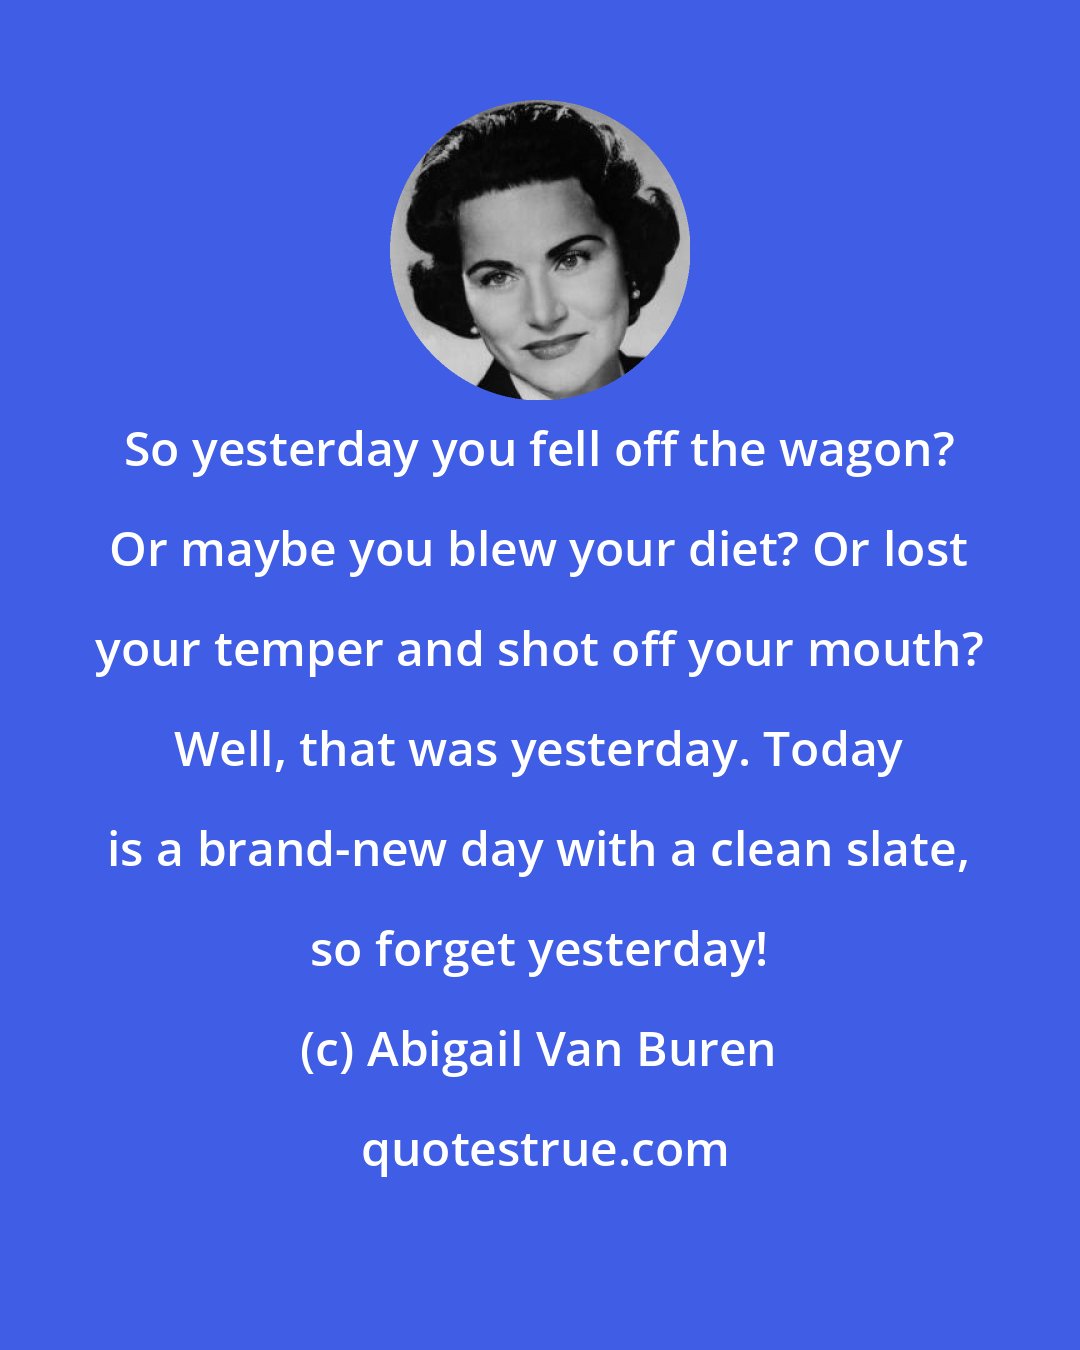 Abigail Van Buren: So yesterday you fell off the wagon? Or maybe you blew your diet? Or lost your temper and shot off your mouth? Well, that was yesterday. Today is a brand-new day with a clean slate, so forget yesterday!